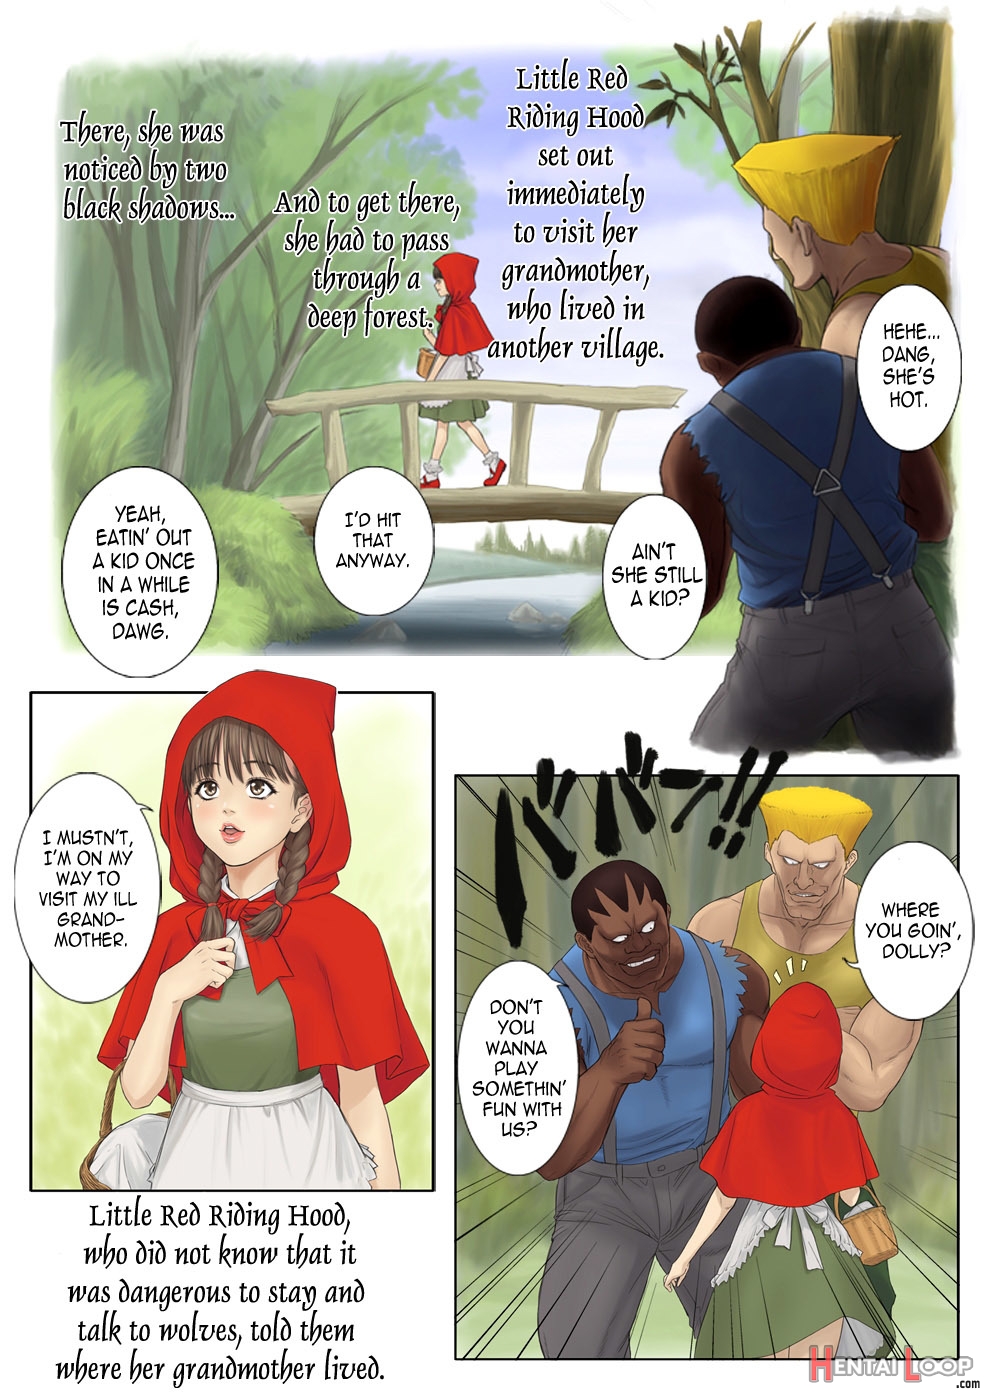 Little Red Riding Hoodâ€™s Adult Picture Book page 4